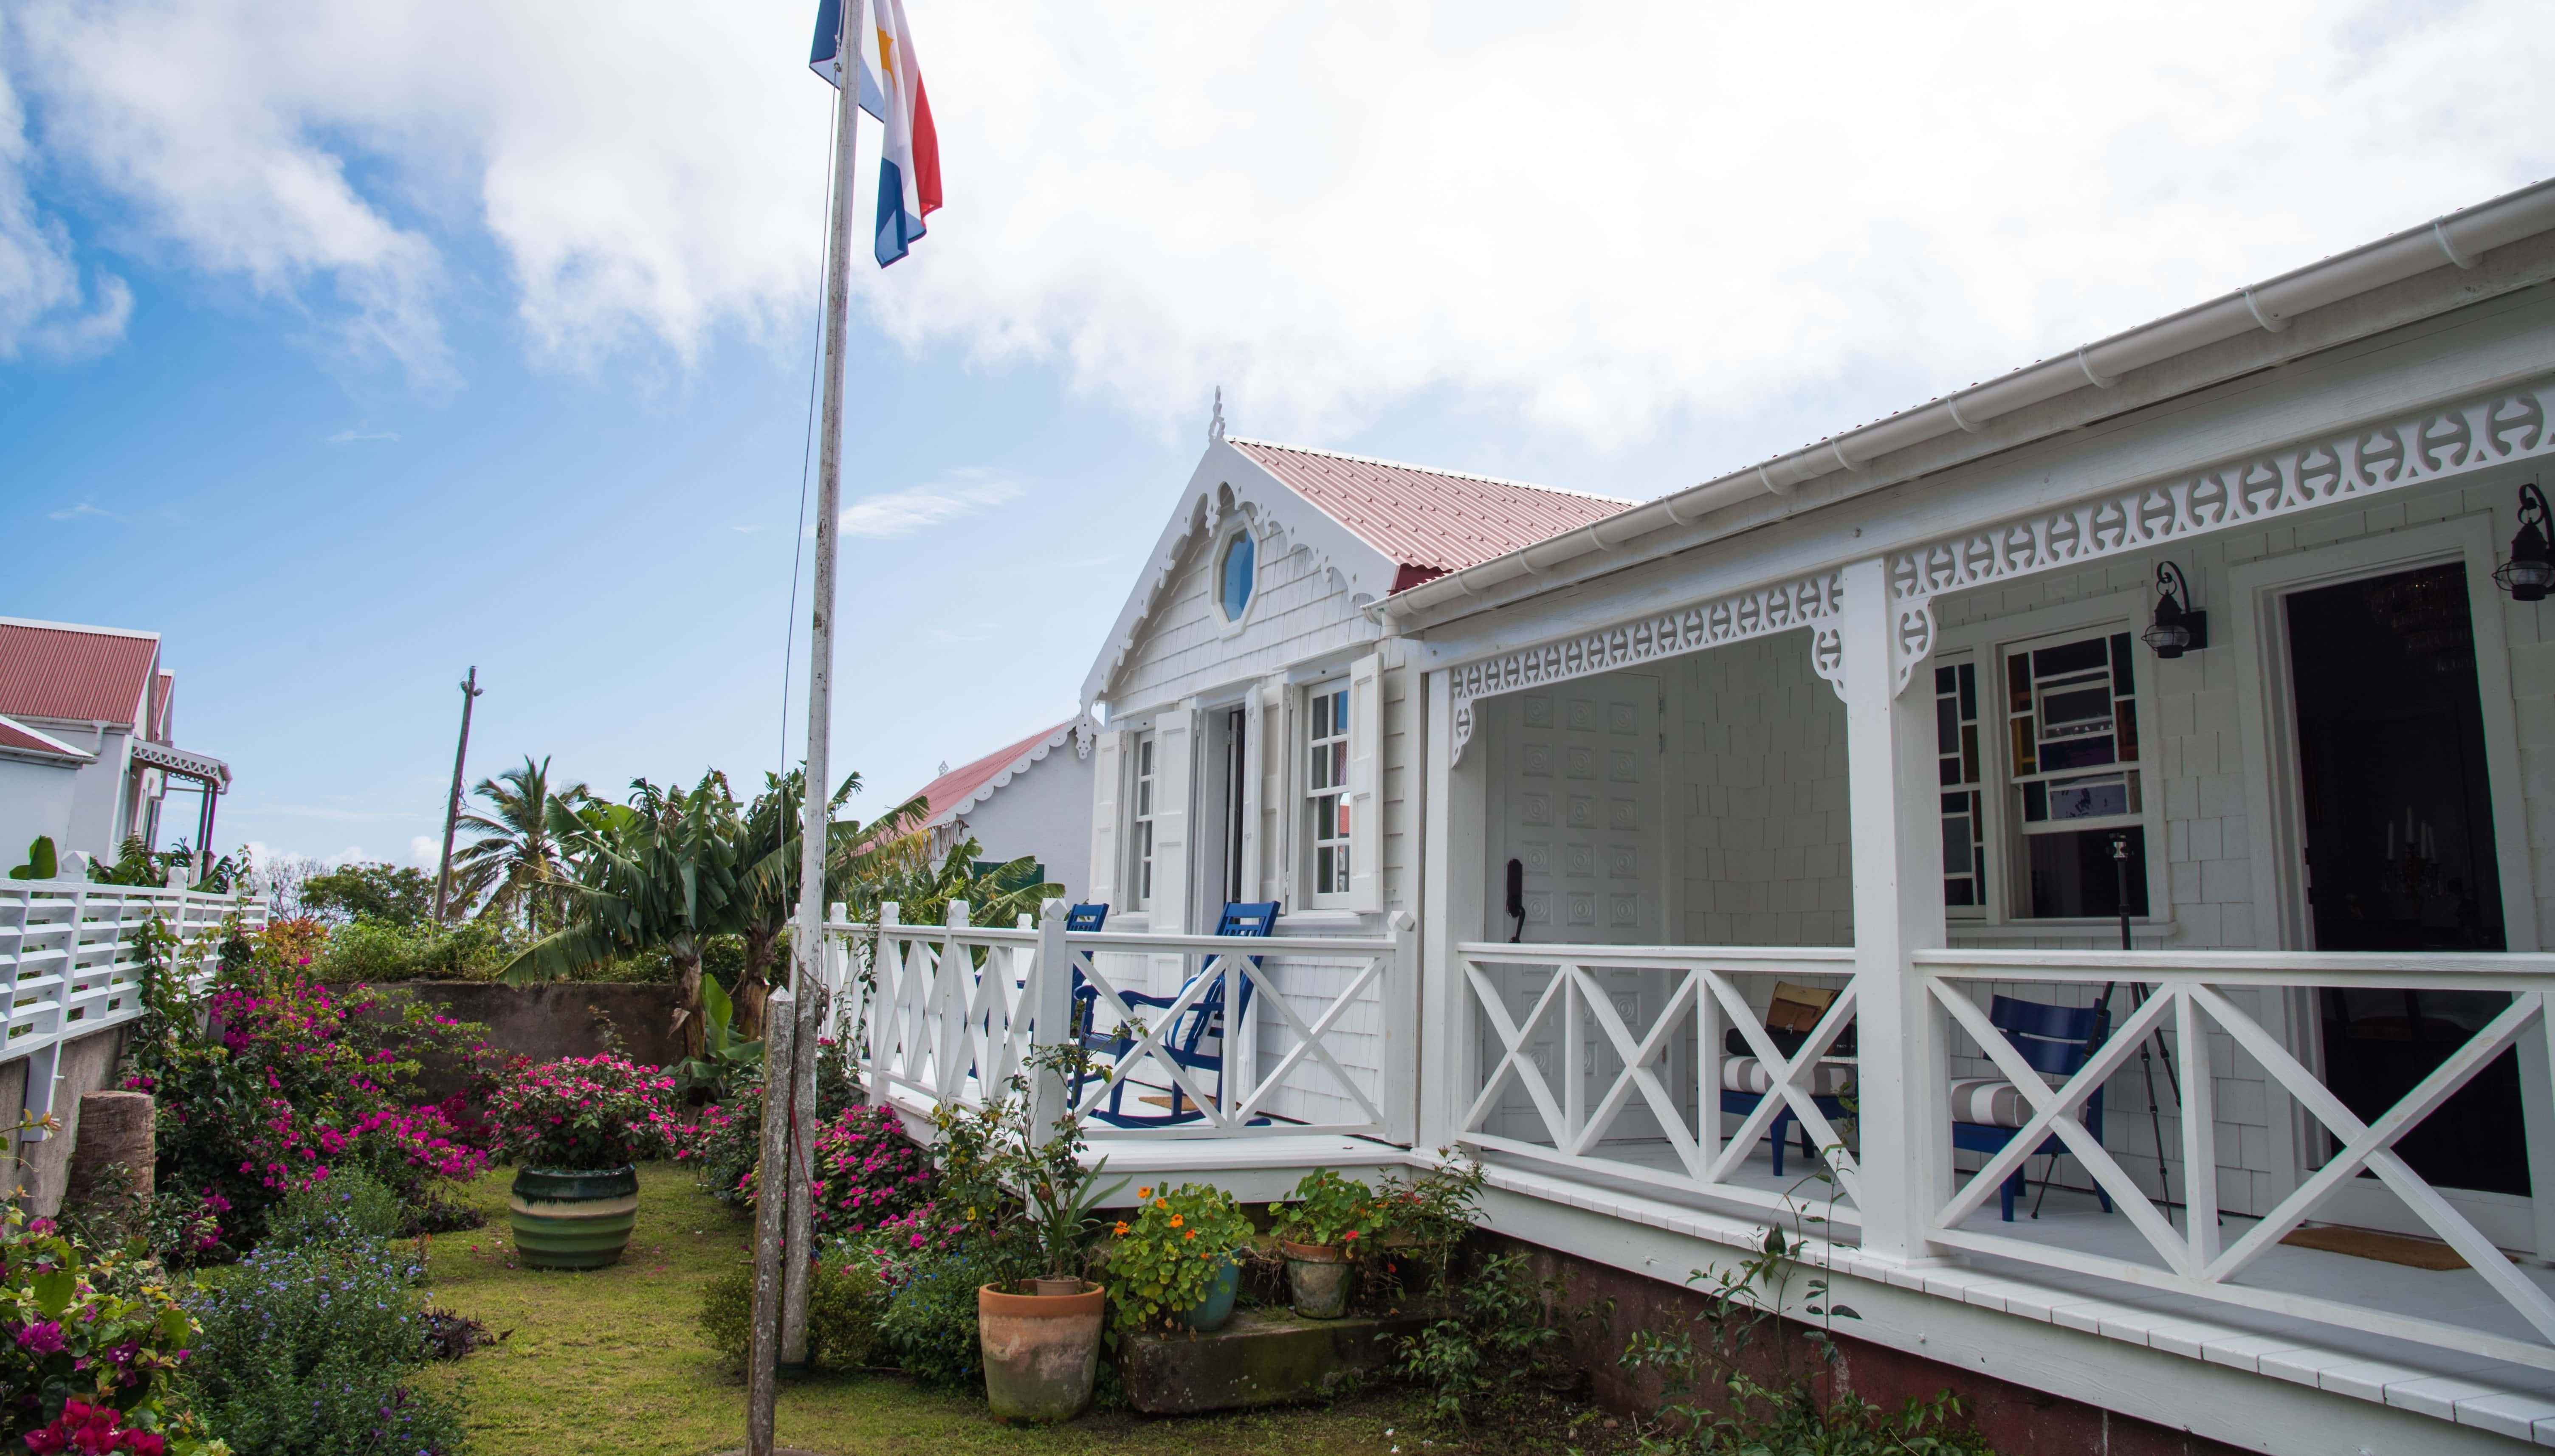 Convent Cottage on the island of Saba